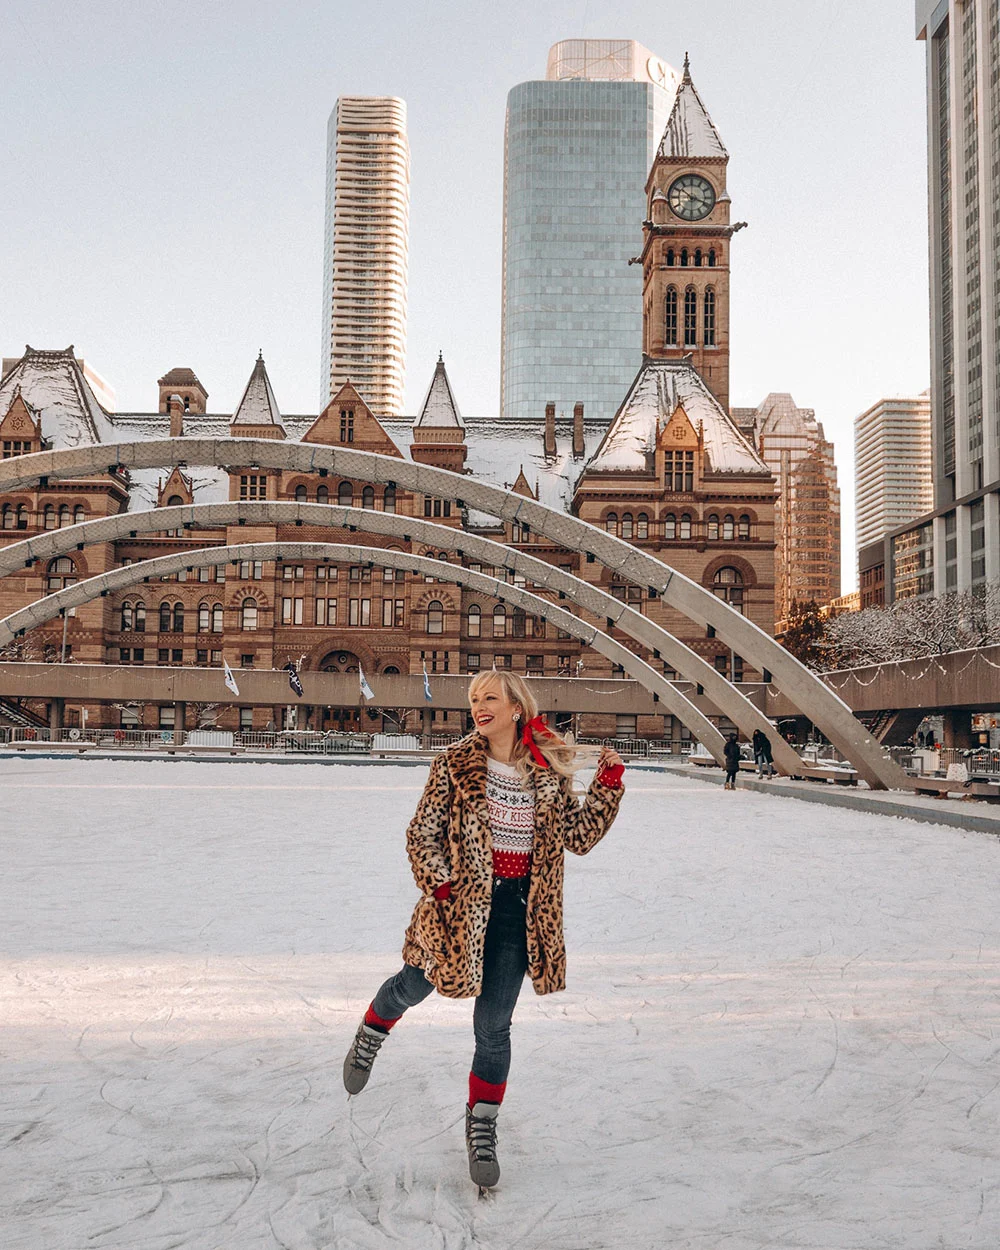 If you're planning on visiting Toronto soon and hoping to get some great photos while you're there, you definitely don't want to miss this guide on the most instagrammable places in Toronto, outdoor edition! This guide features all sorts of incredible outdoor photography locations in Toronto and the GTA. Pictured here: Nathan Phillips Square